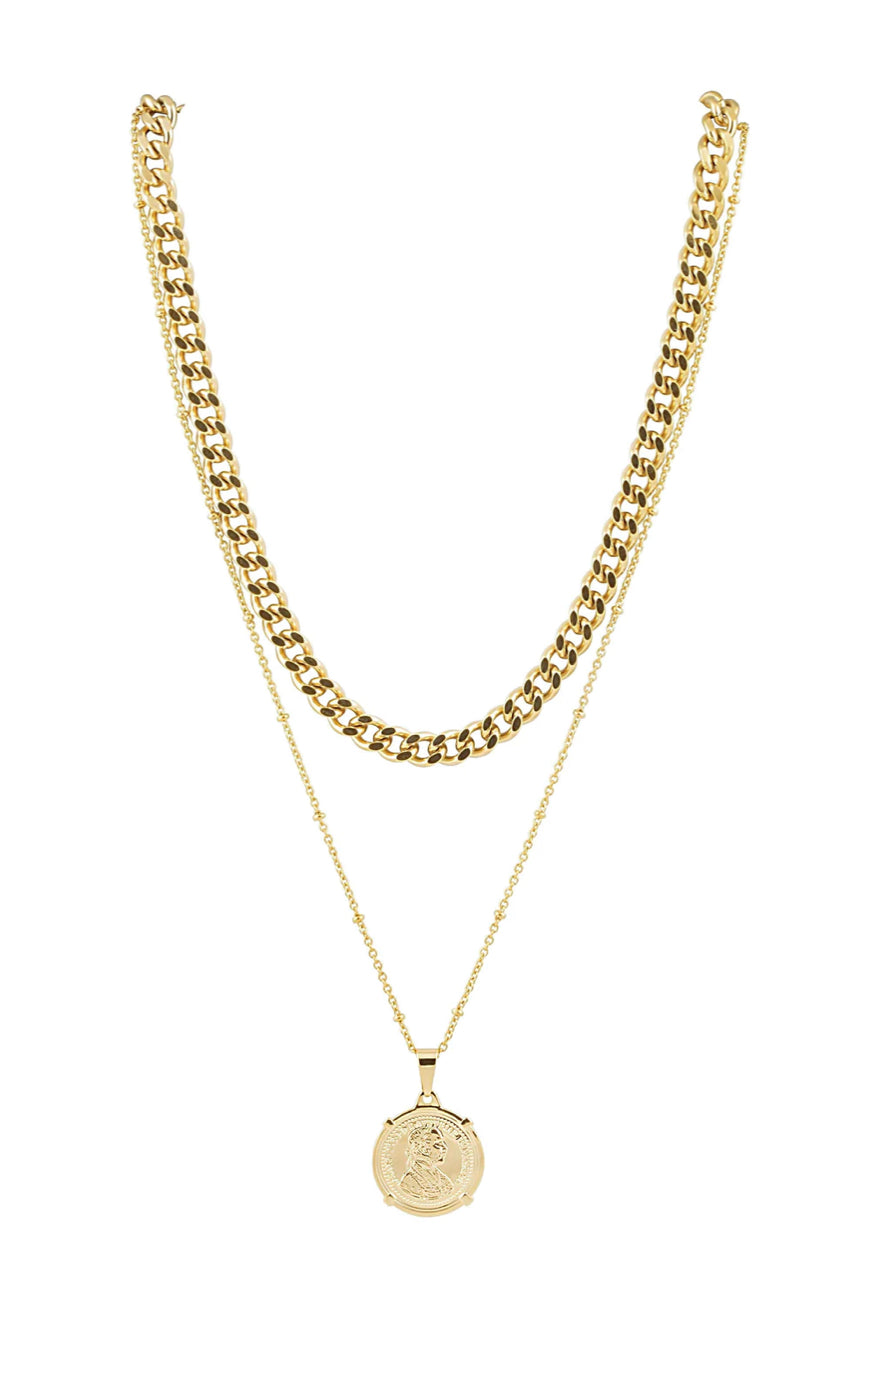 Gold Chain and Coin necklace